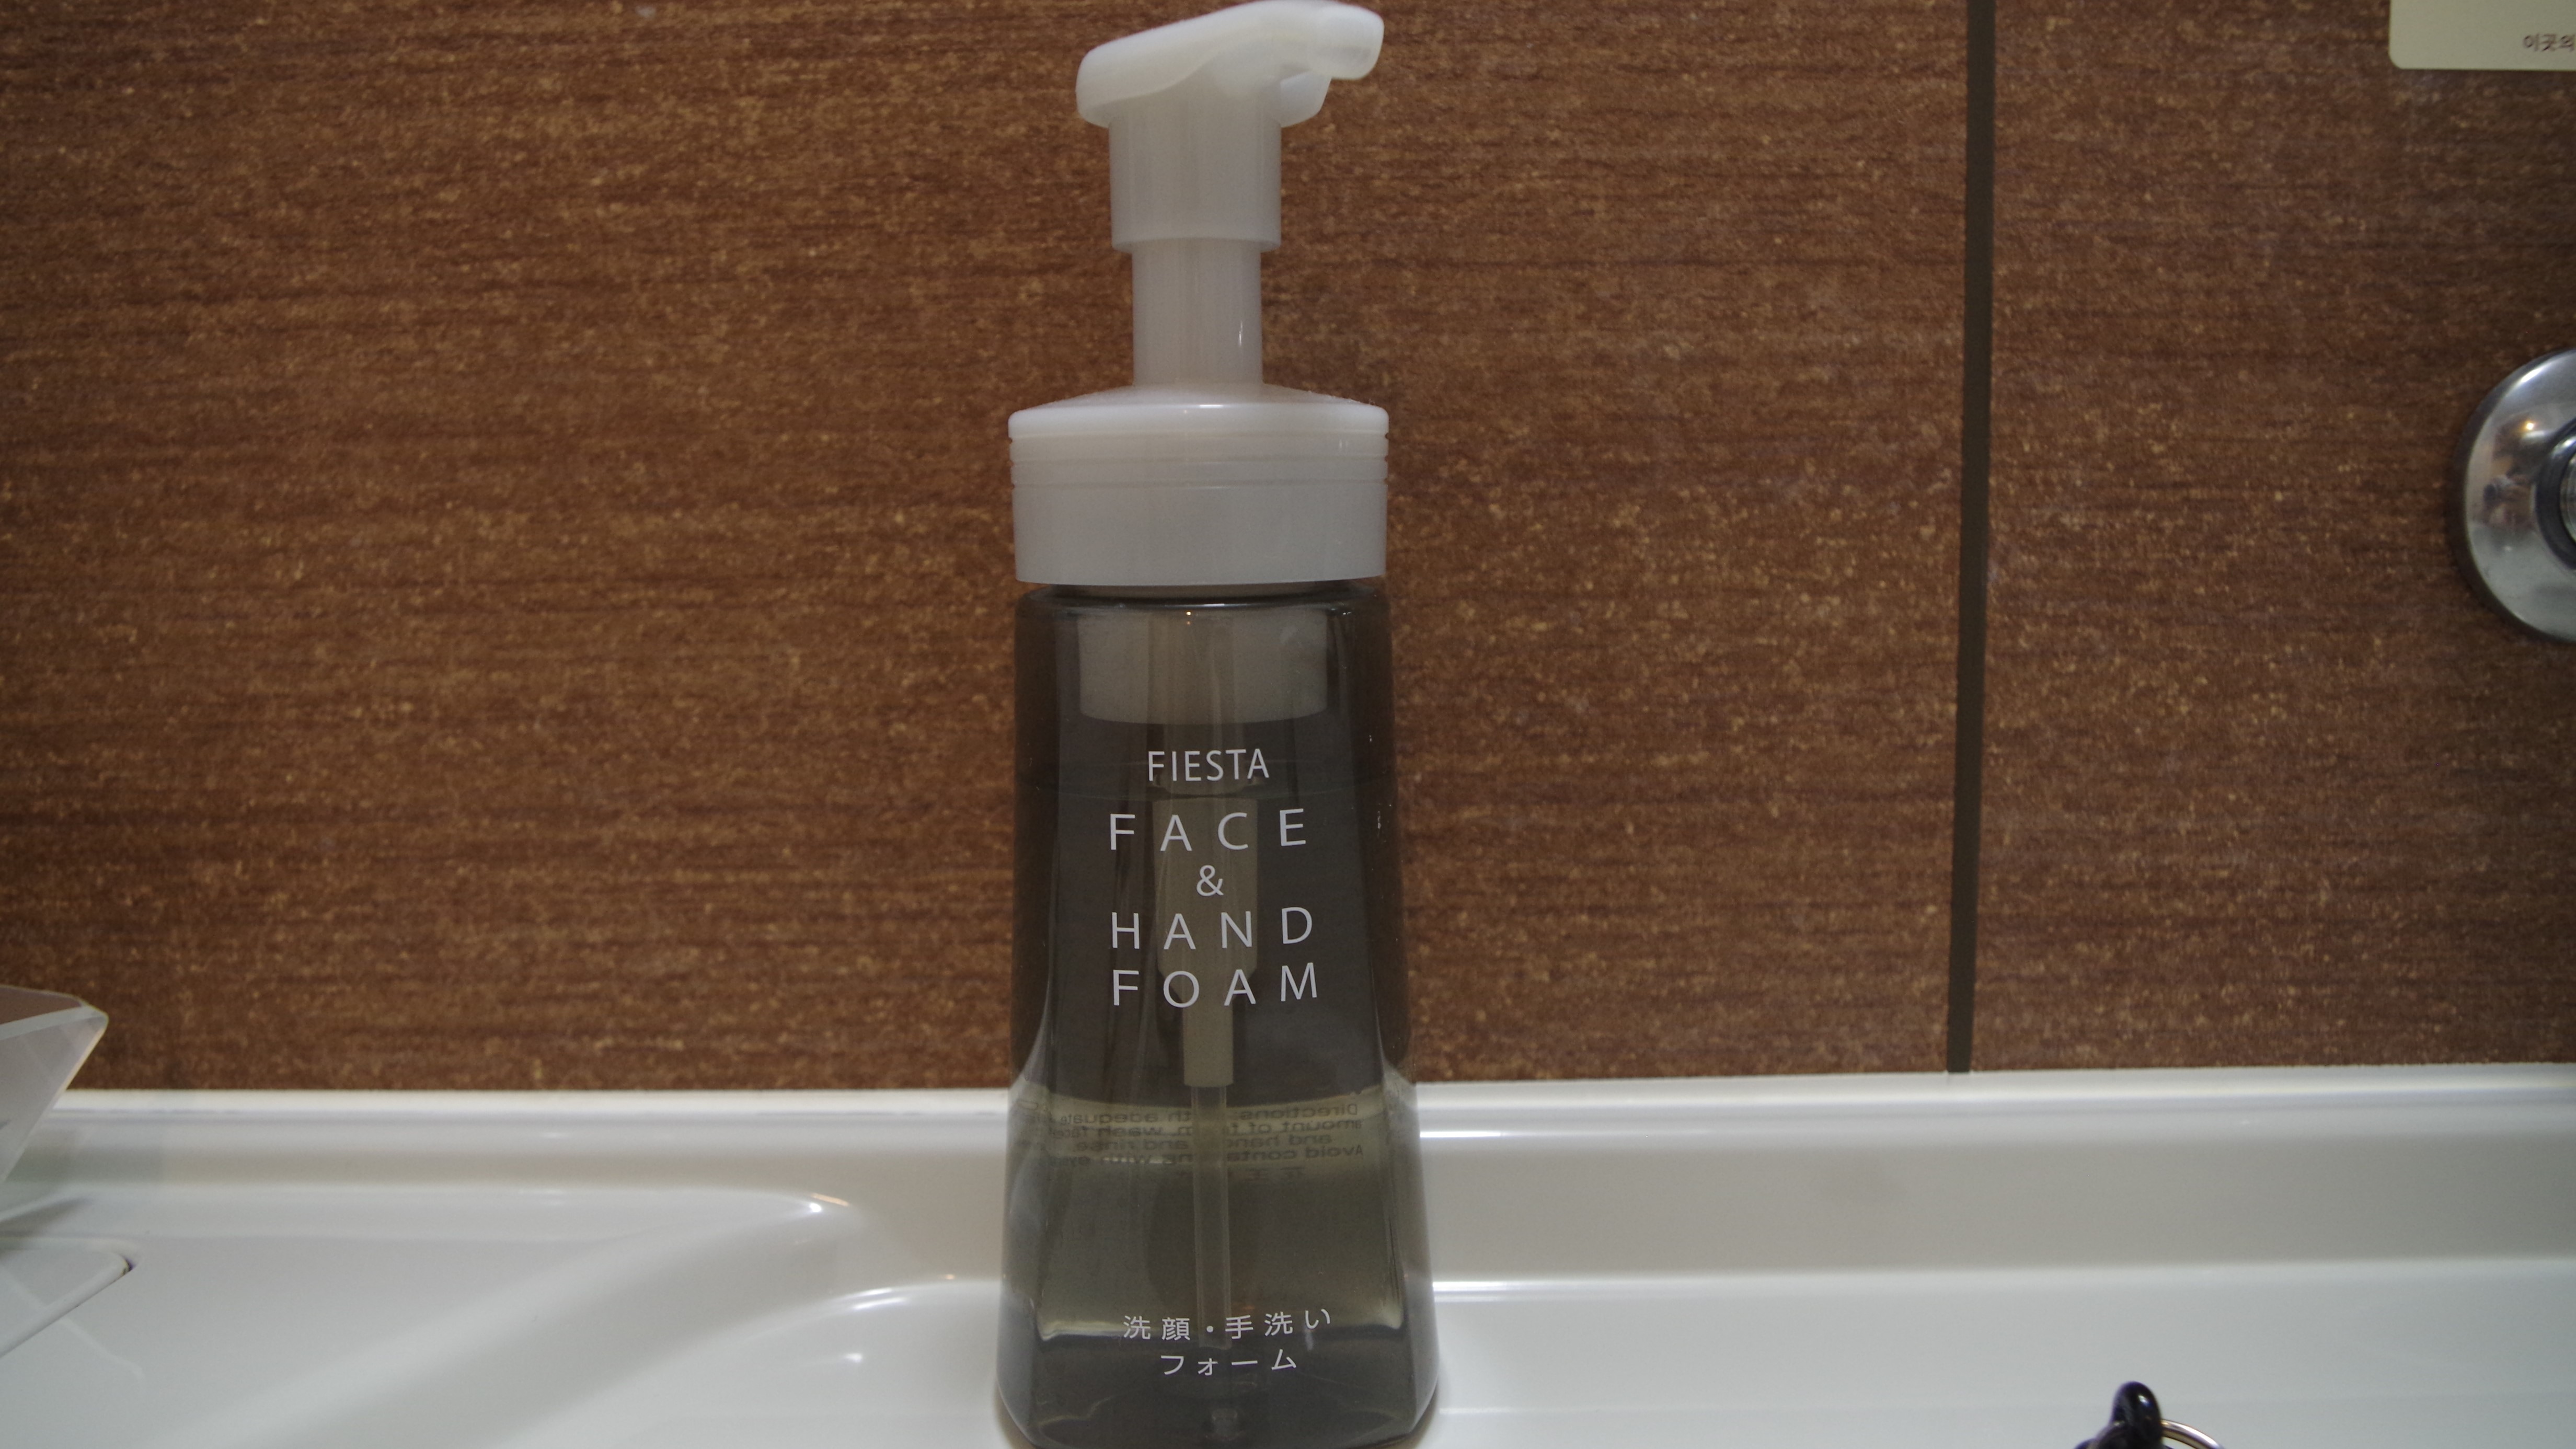 Face wash / hand soap